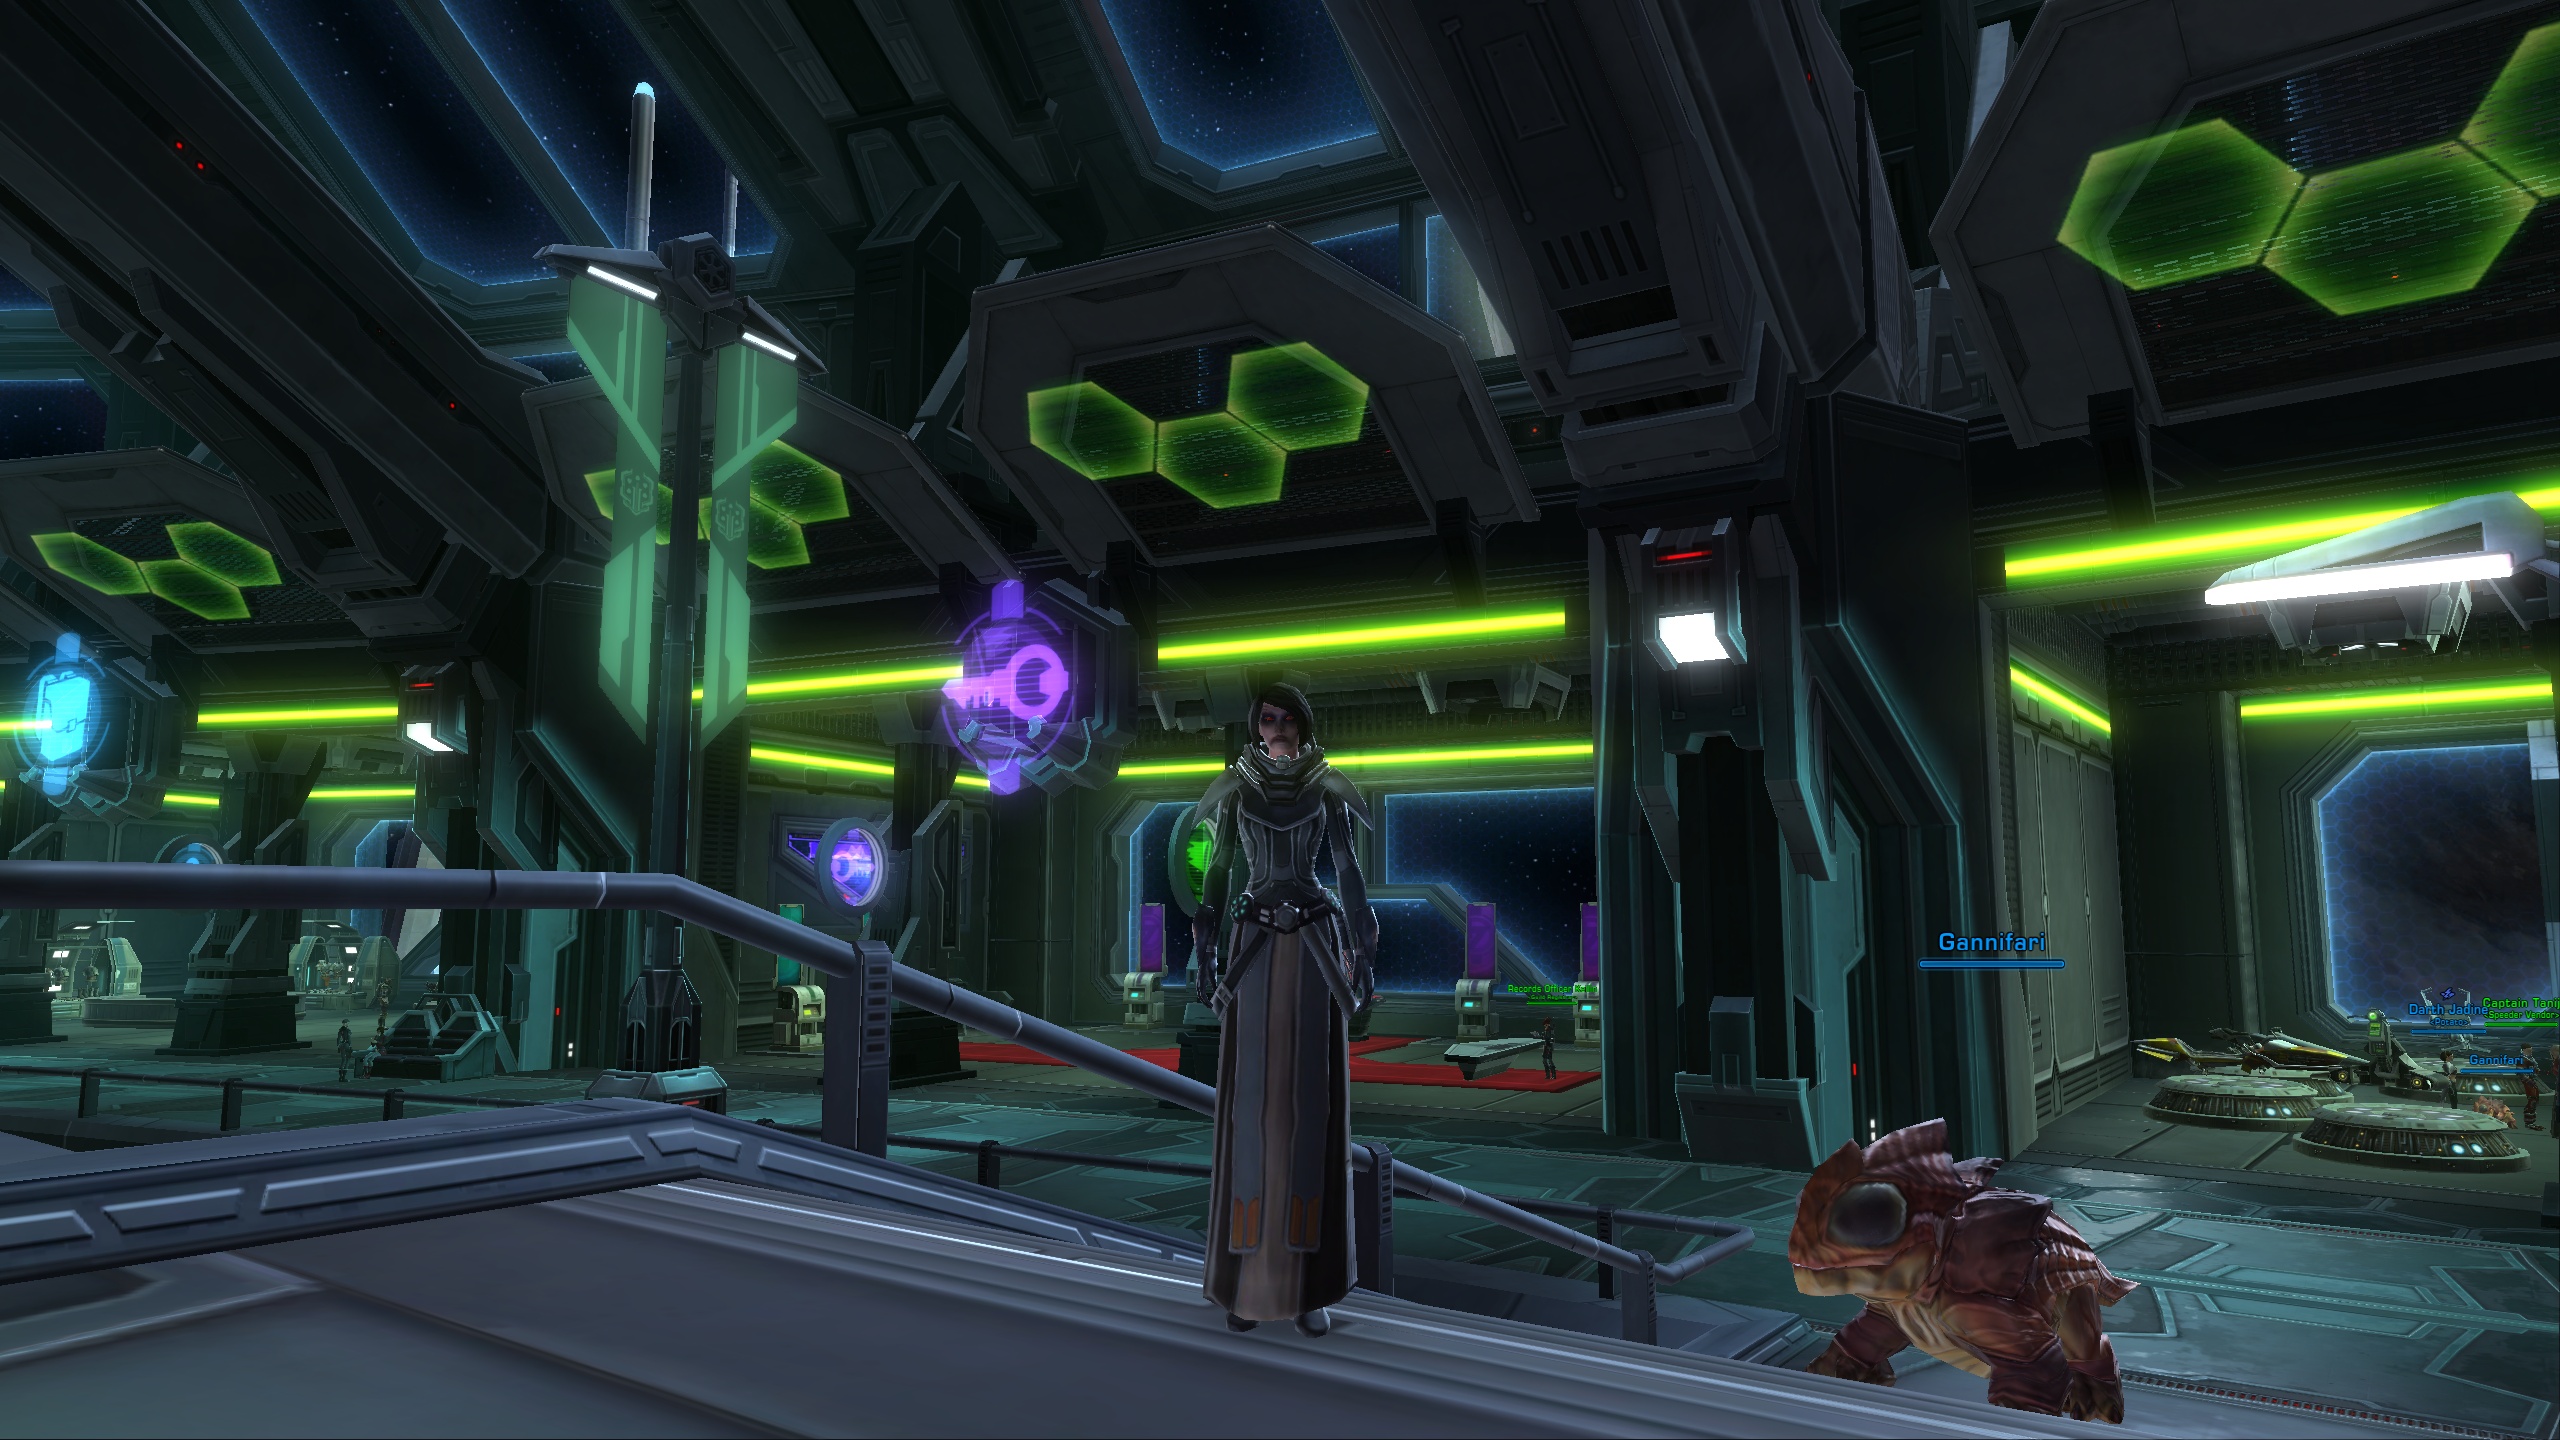 SWTOR Server Transfer Loyalty Rewards Now in a Mailbox You | Inquisitor's Roadhouse